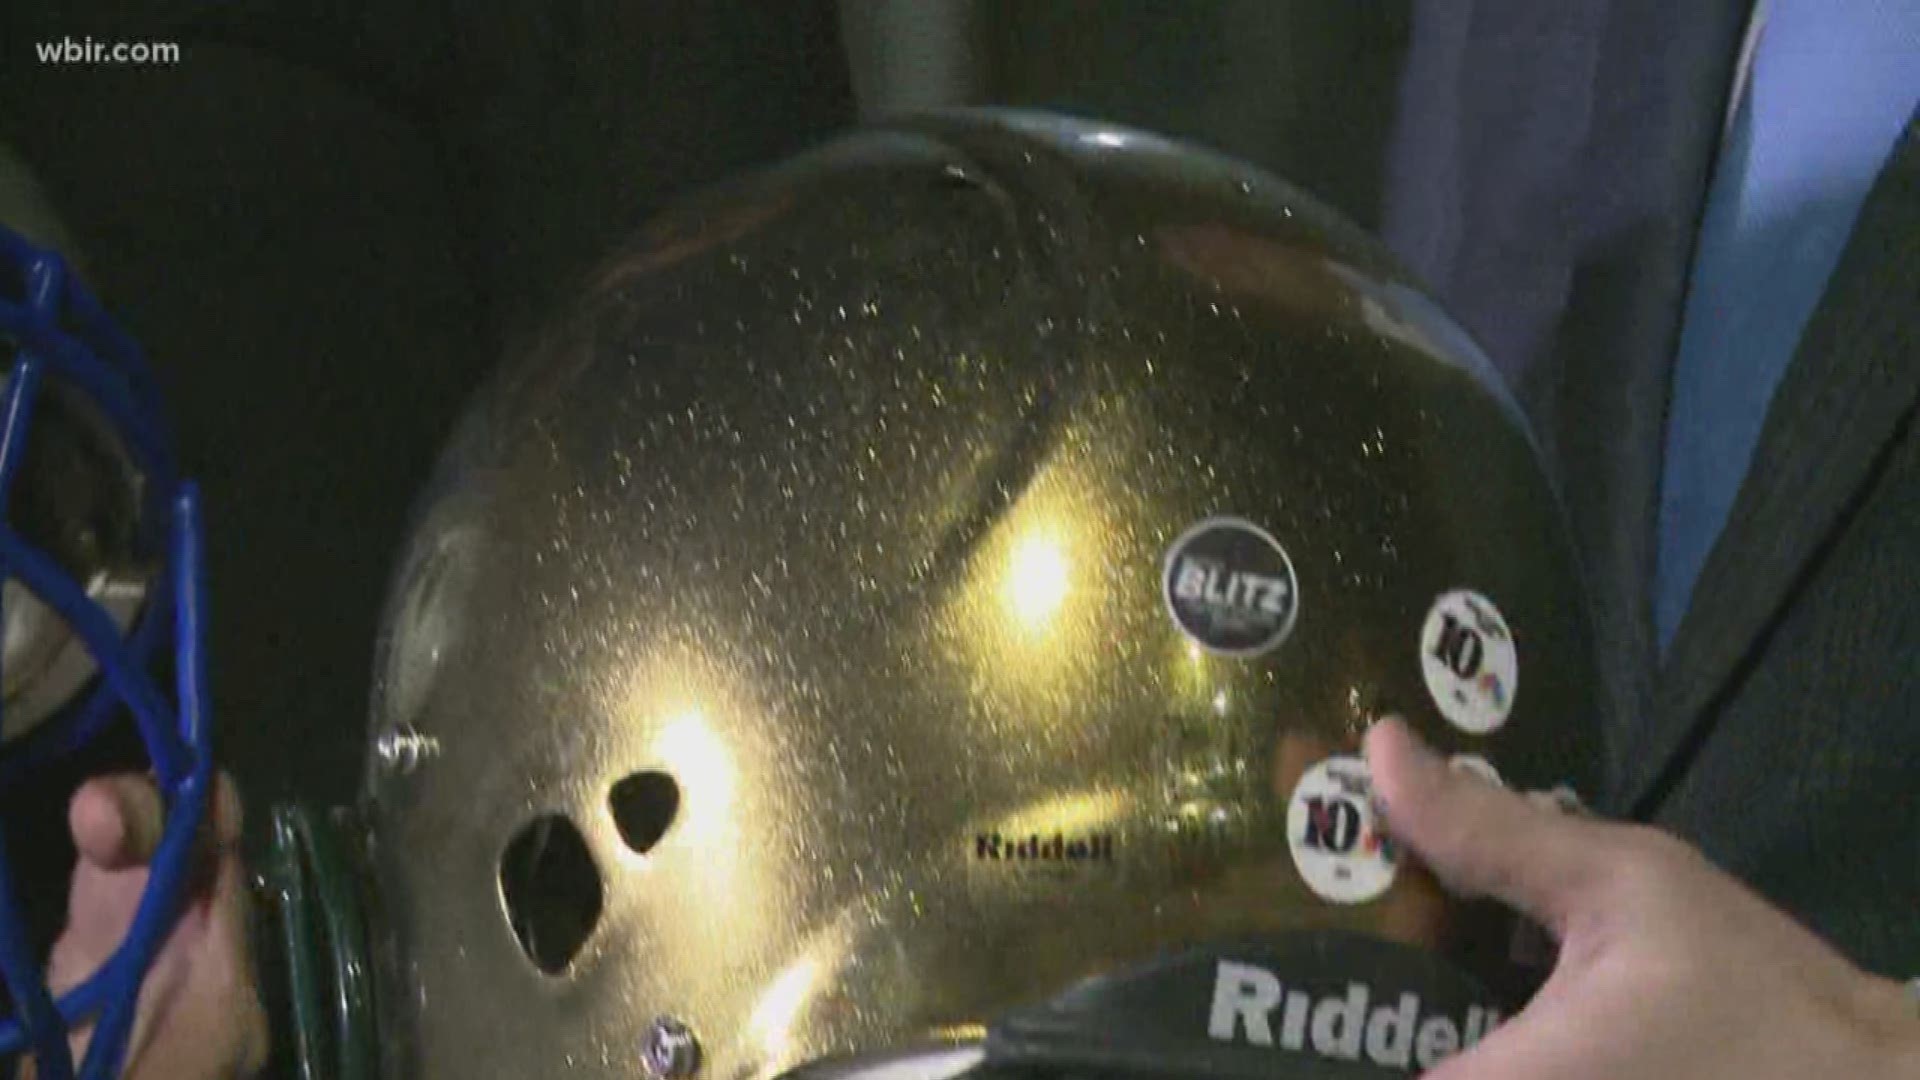 10Sports Blitz gives out their stickers for the top performances in the area.